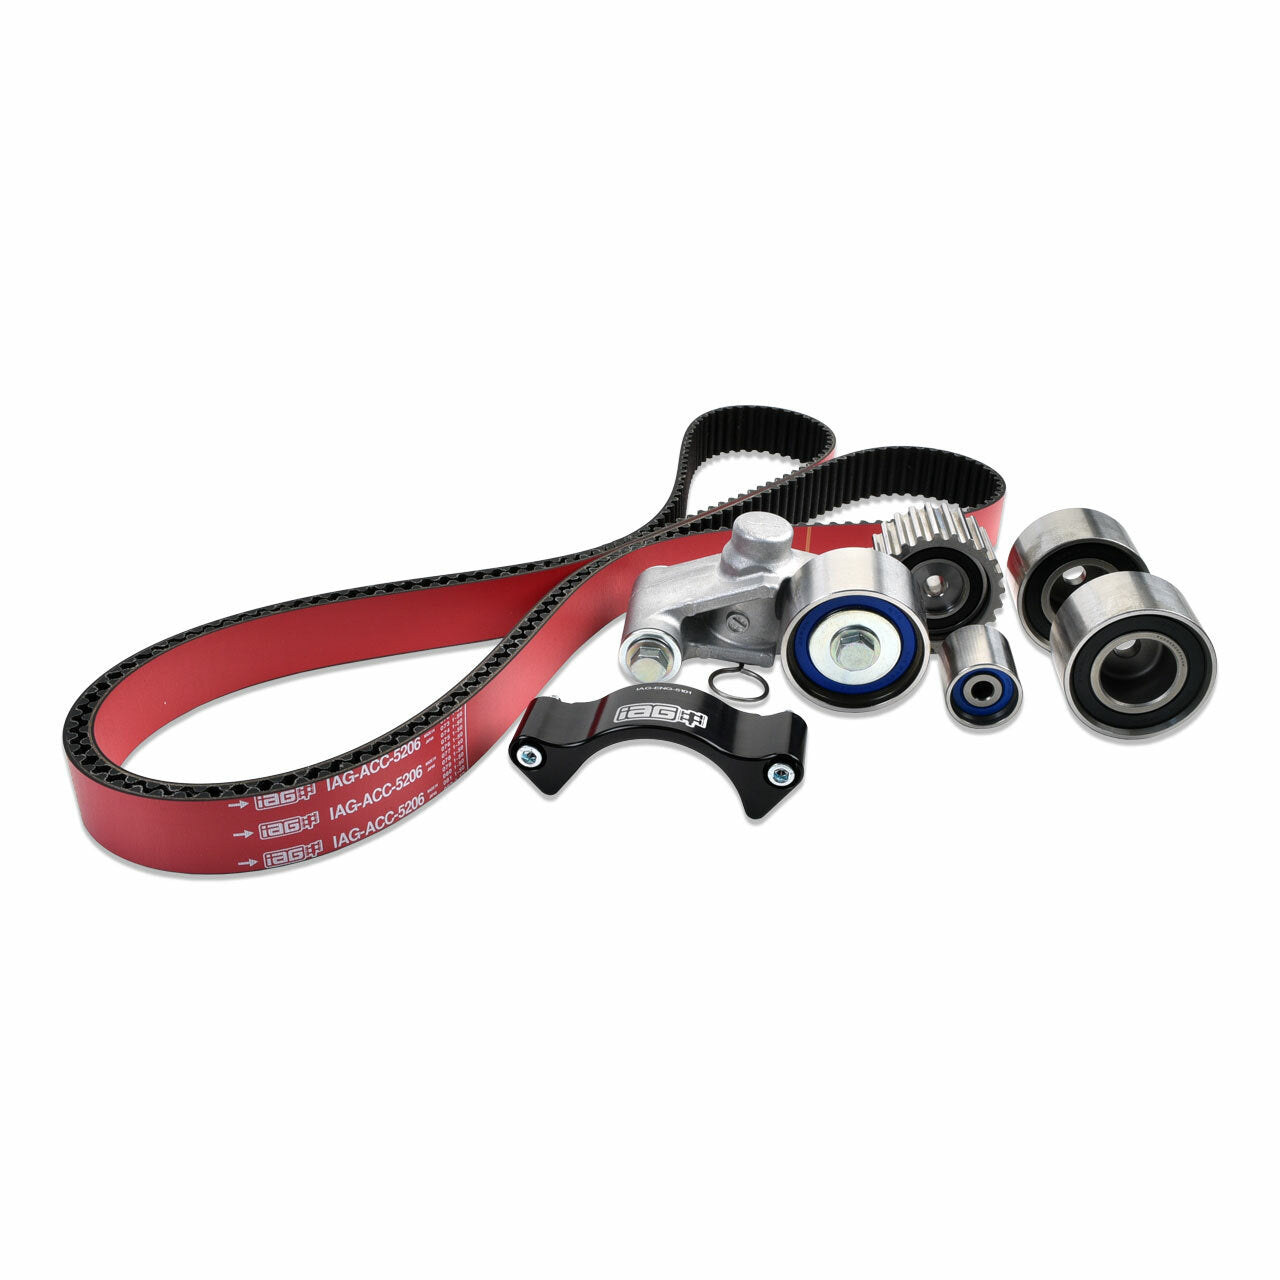 IAG - Timing Belt Kit with IAG Red Racing Belt, Timing Guide, Idlers & Tensioner - 02-14 Subaru WRX, 04-21 STi, 05-12 LGT, 04-13 FXT